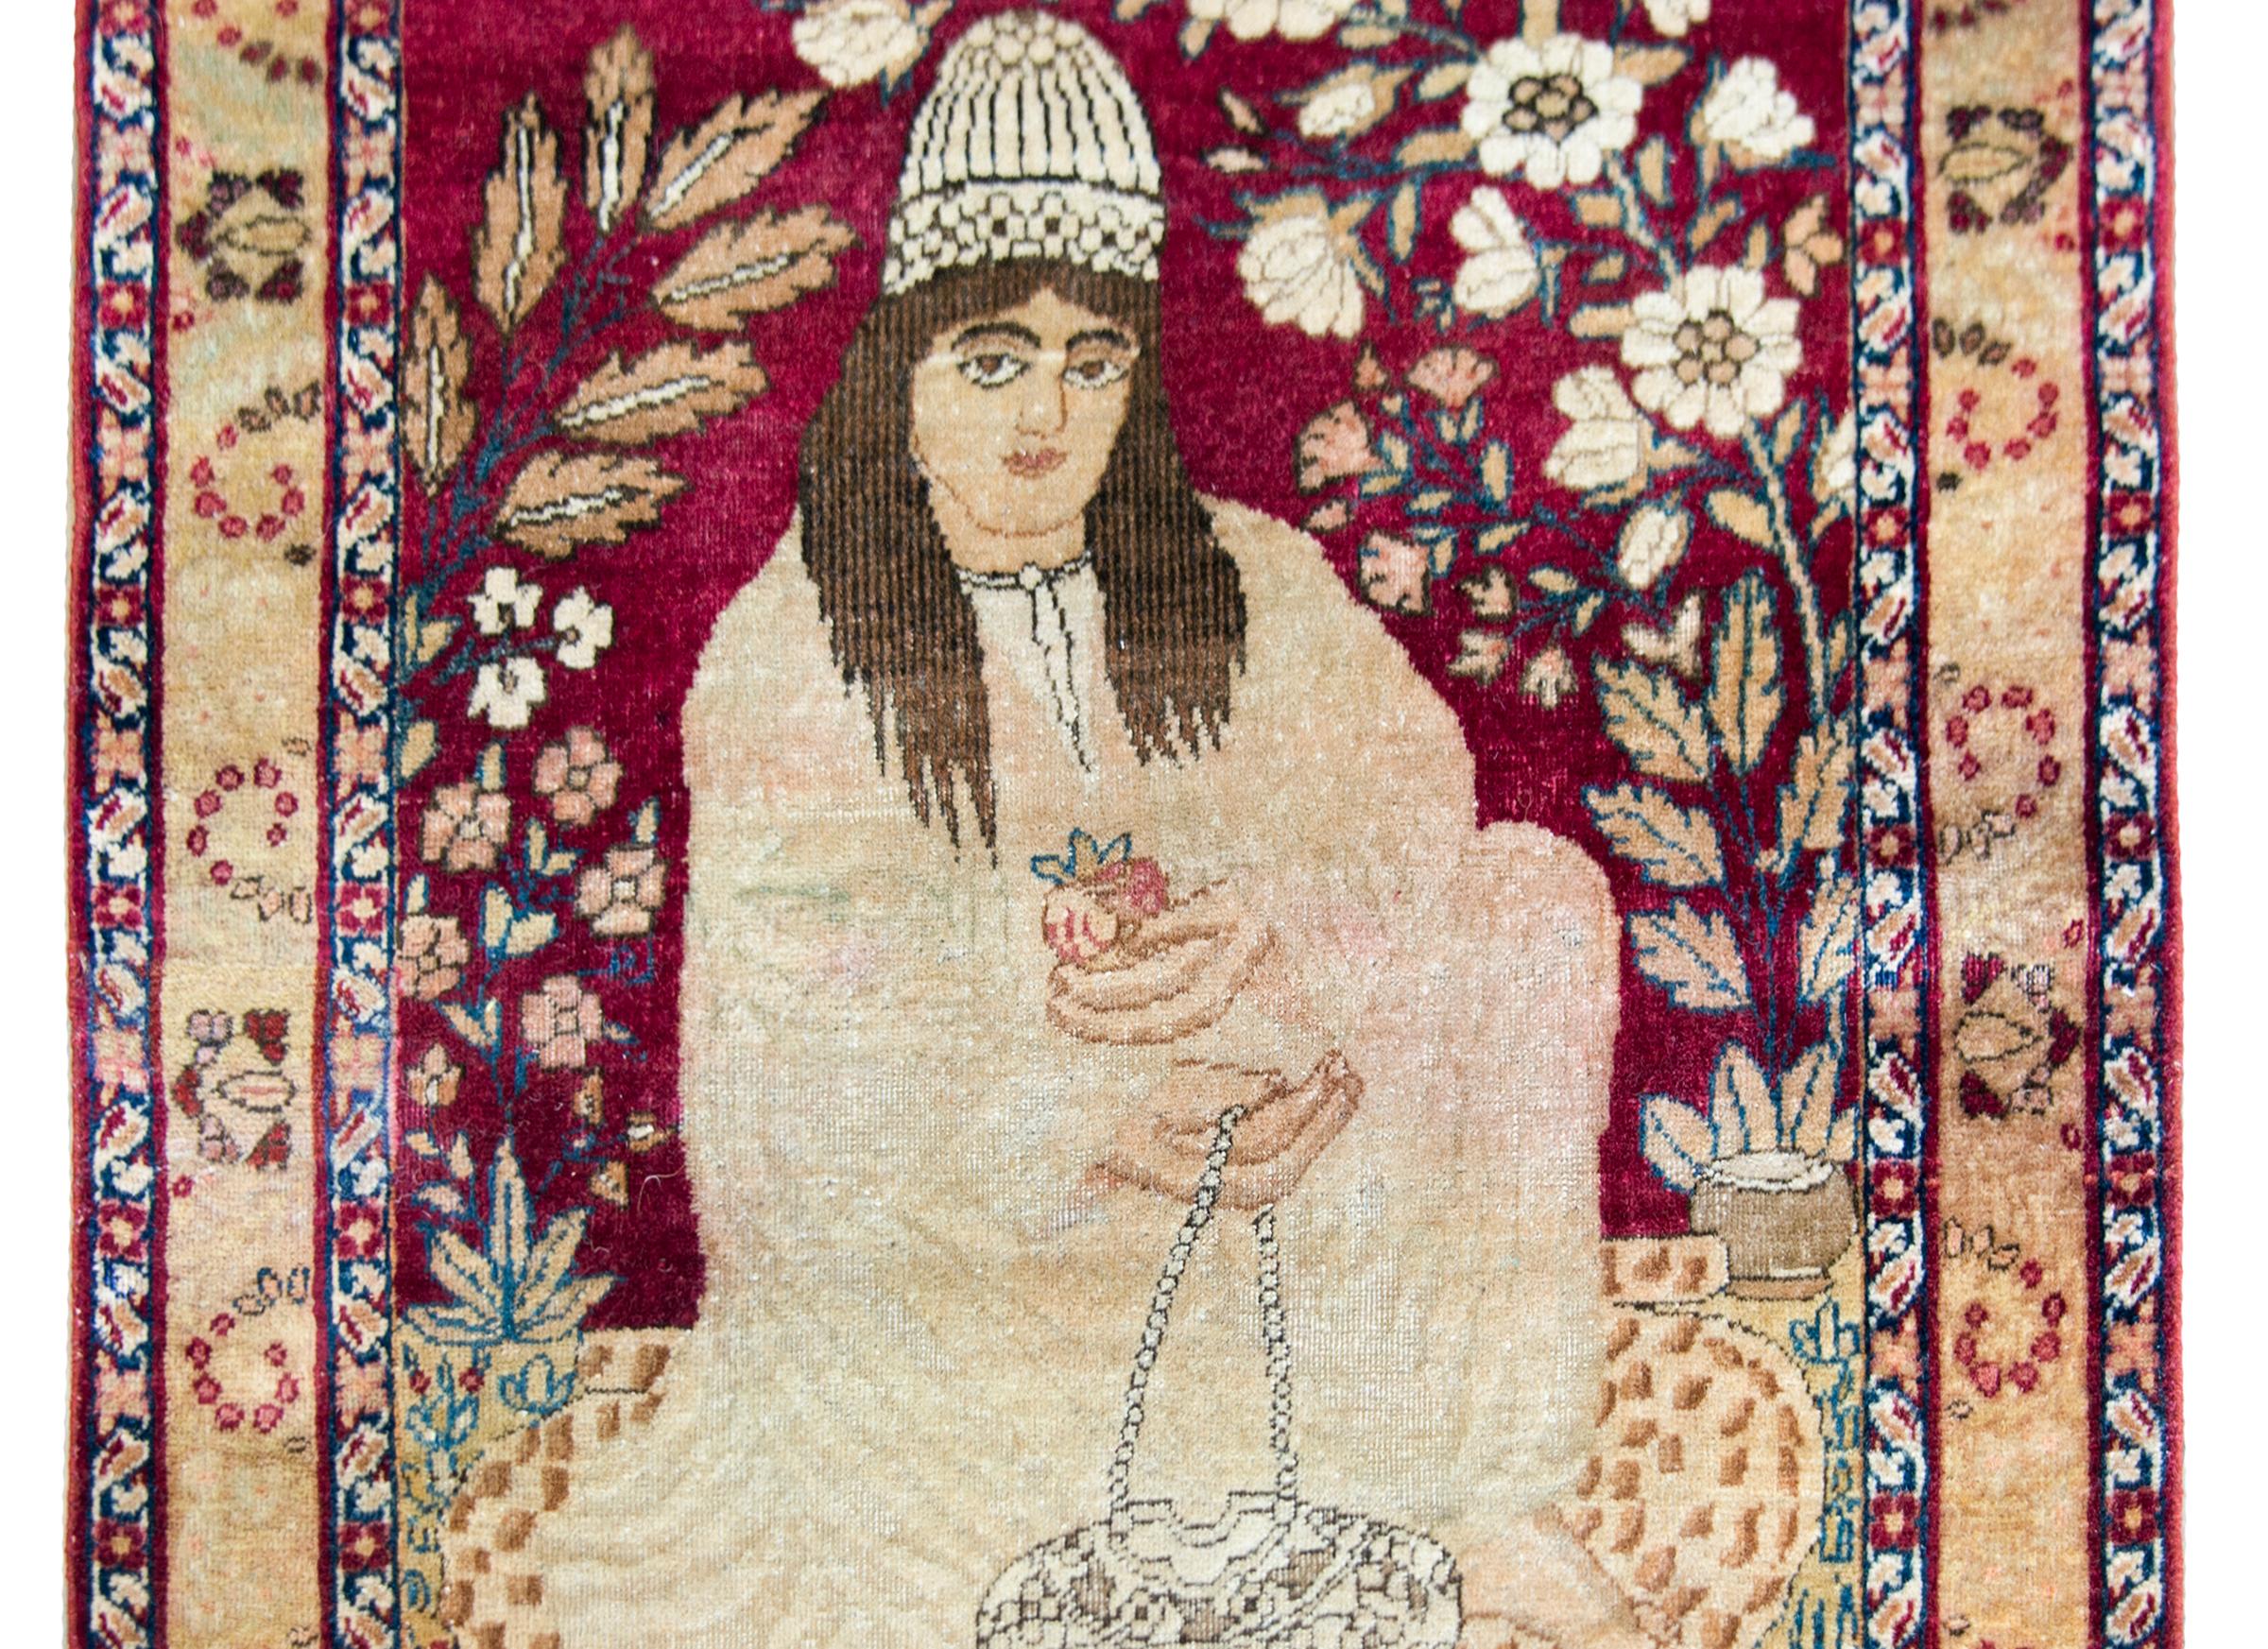 A stunning late 19th century Persian Lavar Kirman pictorial rug depicting a seated Gonabadi Dervish, a Sufi order originating in the 14th century whose followers believe in peace, security, equality, and shun violence and politics.  The Dervish is